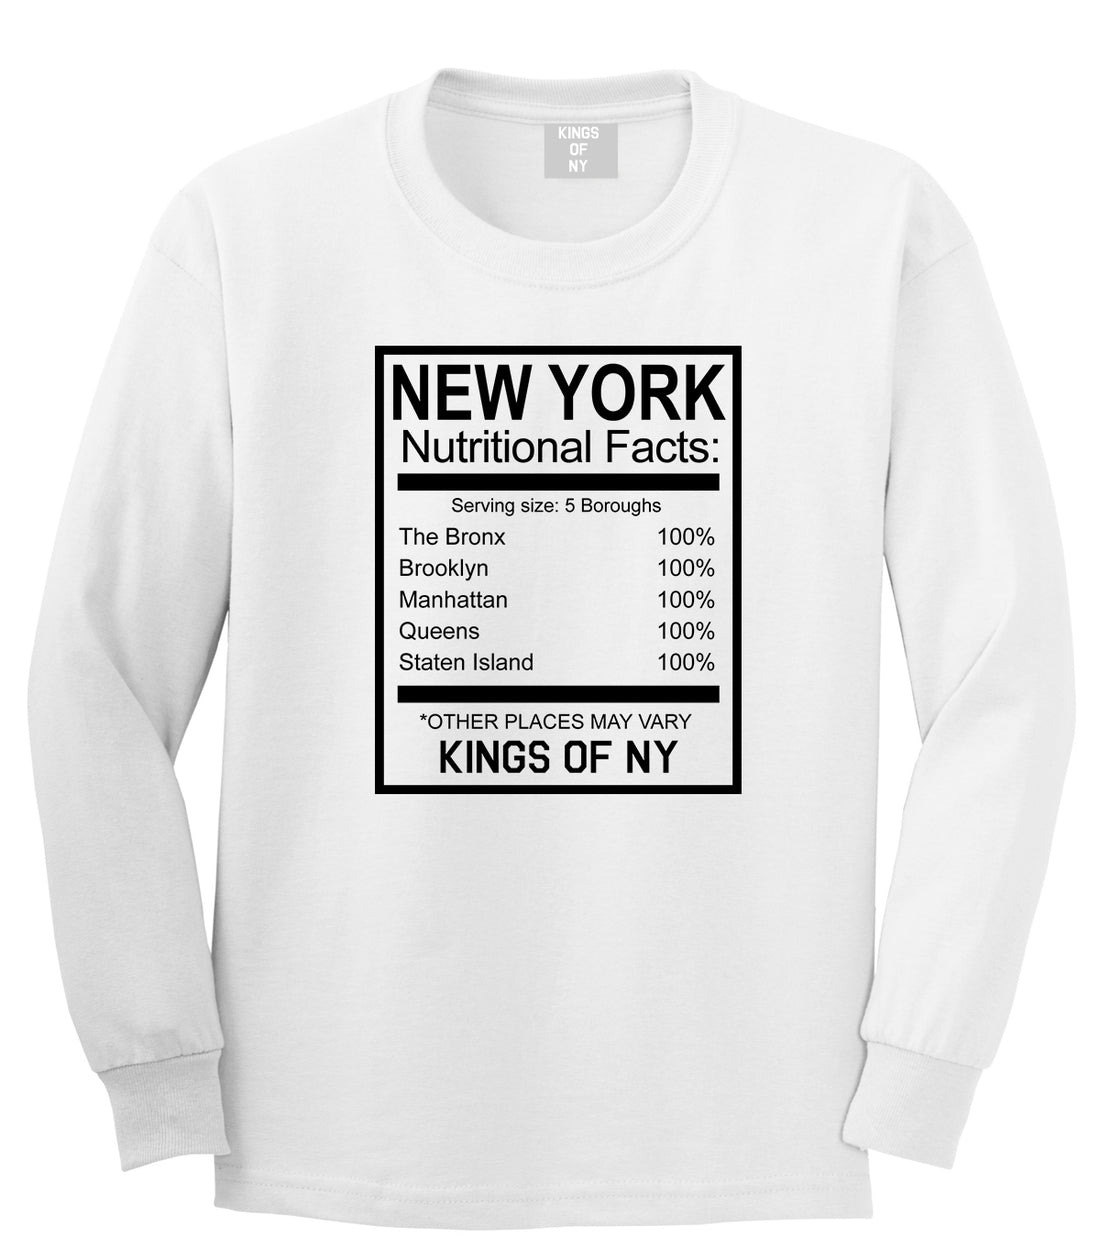 New York Nutritional Facts Long Sleeve T-Shirt in White